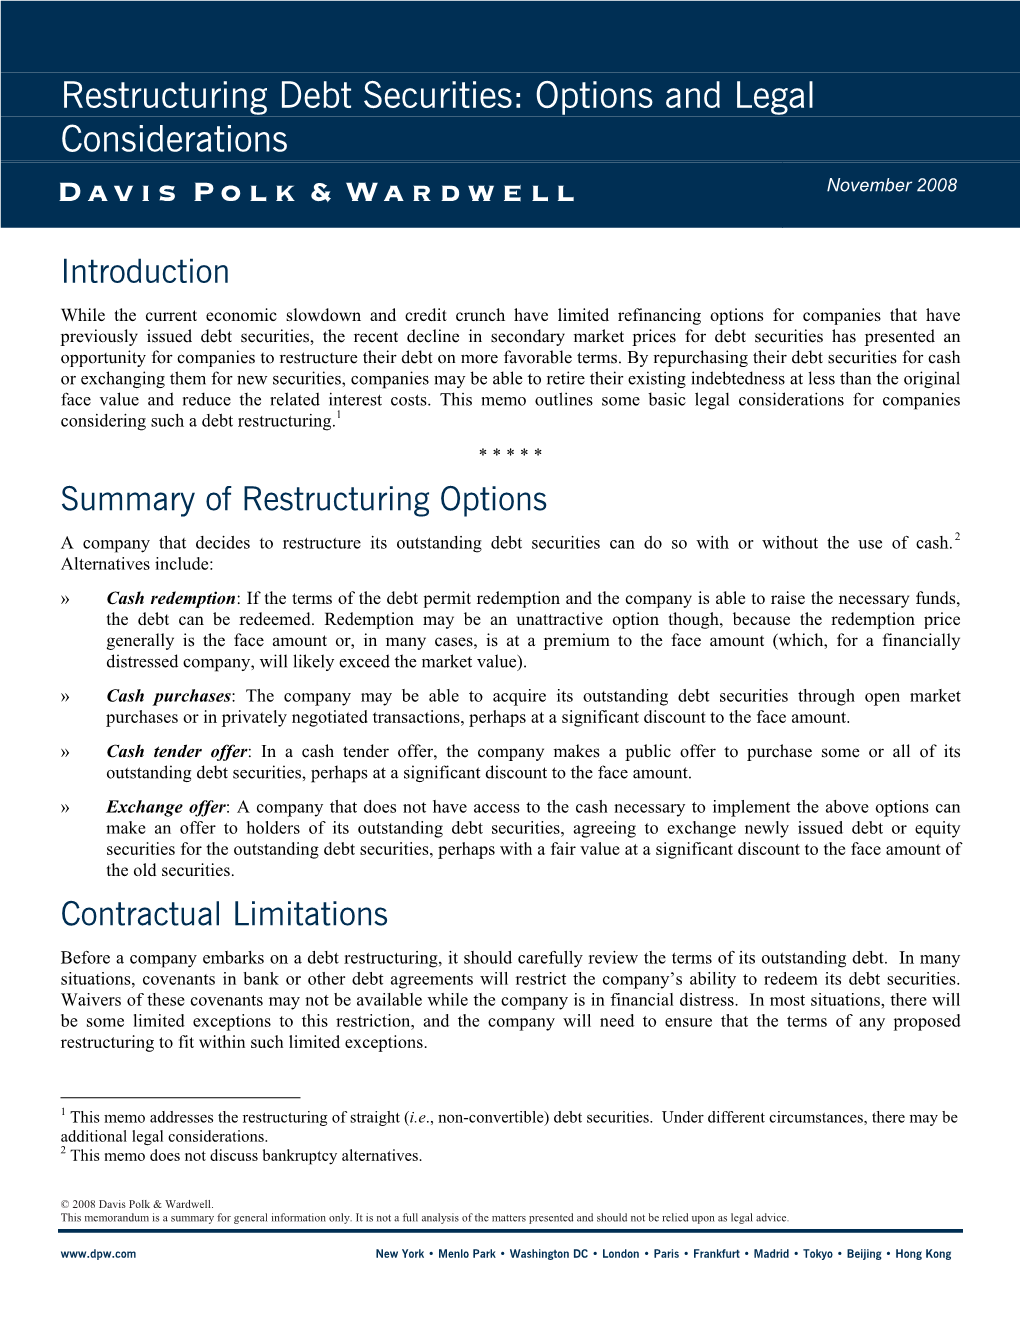 Restructuring Debt Securities: Options and Legal Considerations